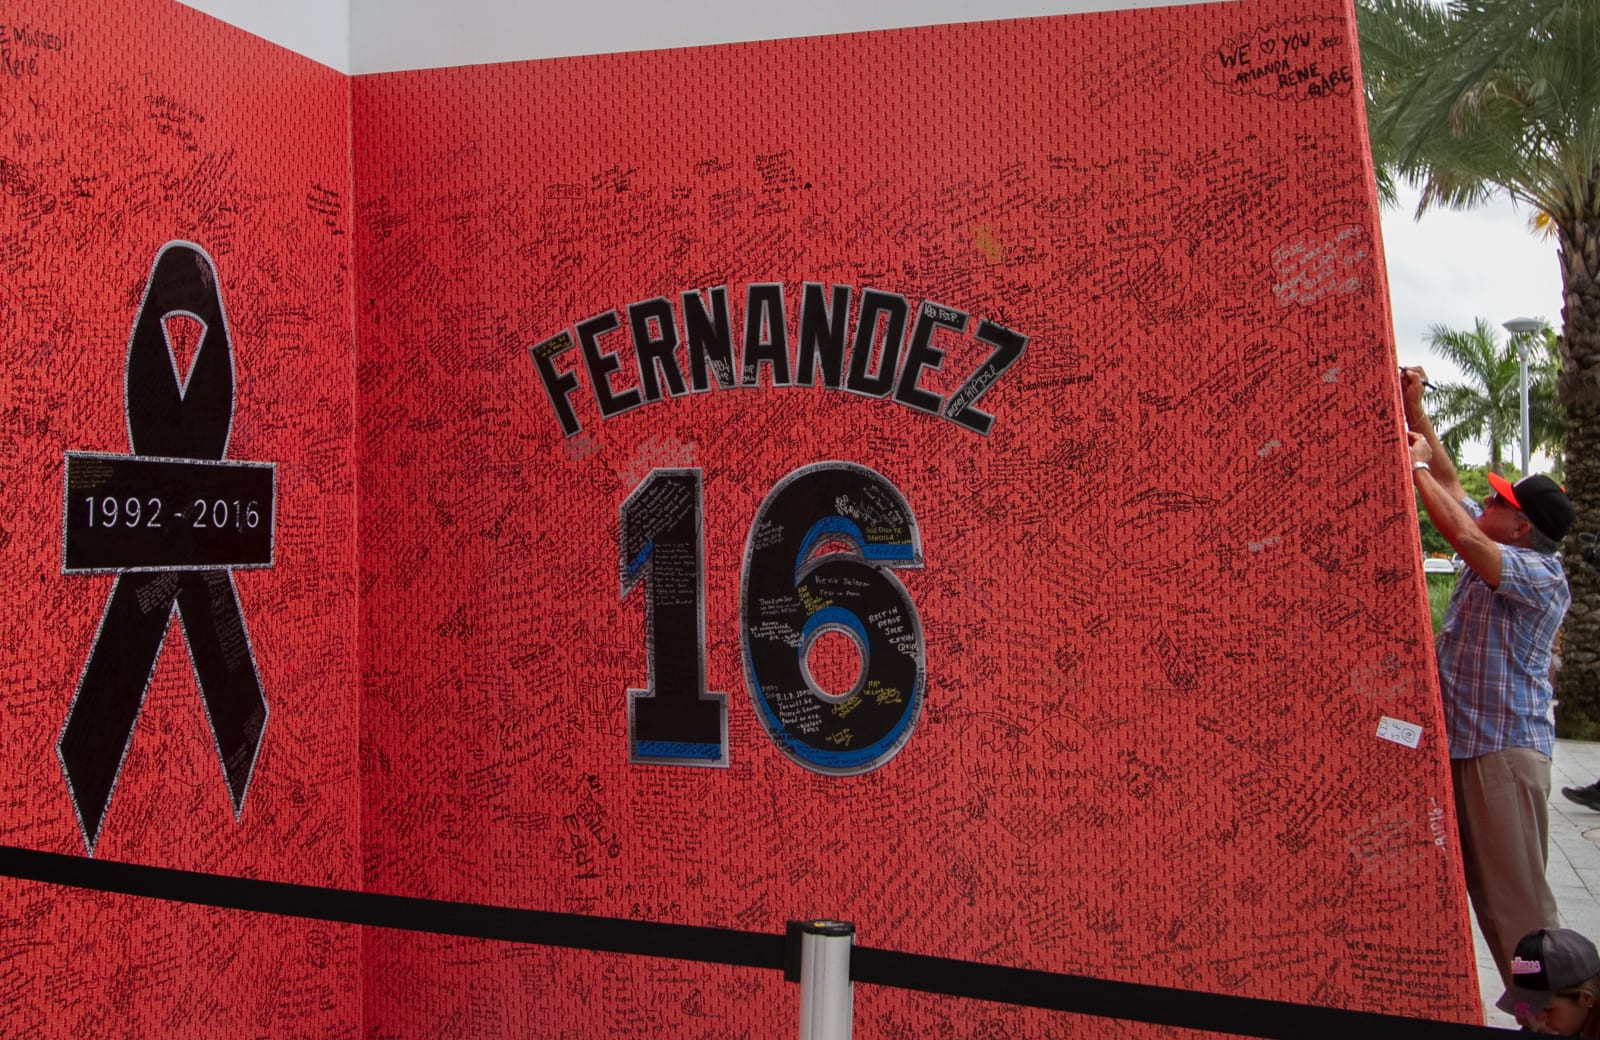 Marlins to retire Jose Fernandez's jersey number - Sports Illustrated